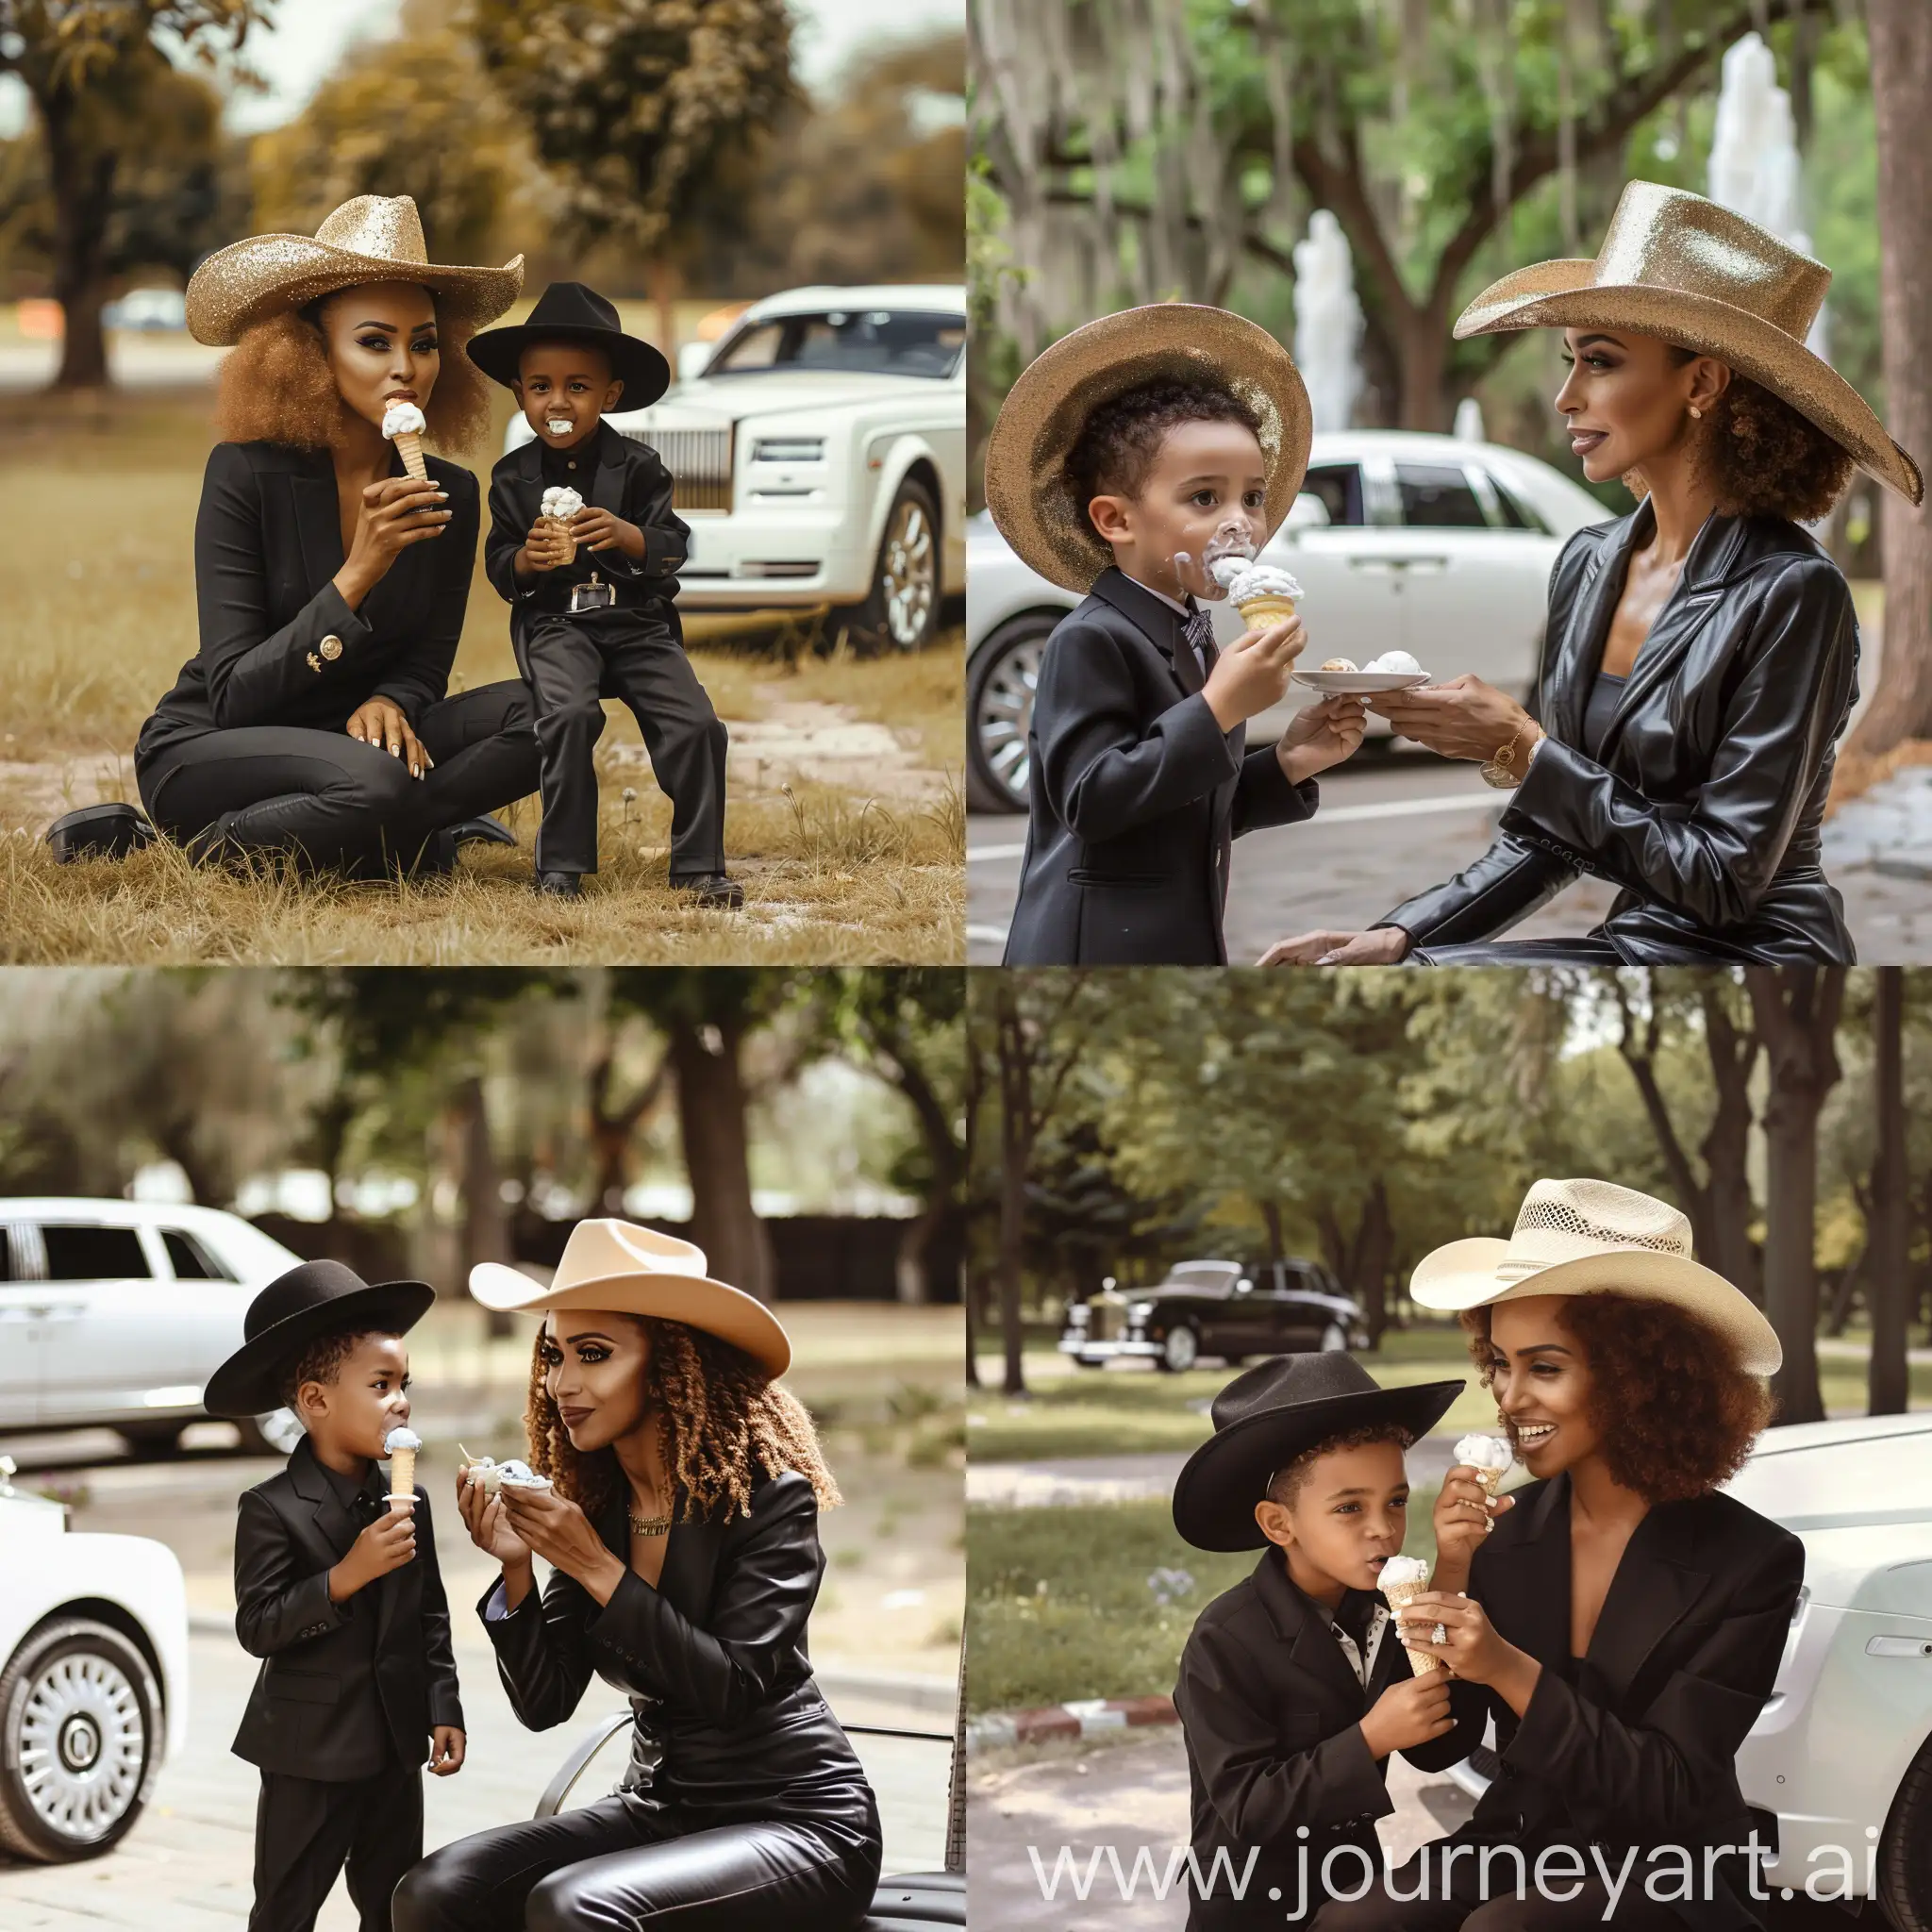 Generate the most realistic photo of Somali rich Mother with her 7 years old son eating ice-cream together at the park. Make sure its authentic summer daY, dress the kid black fit suit with a cowboy-hat. And make sure the mother has Rolls-Royce parking at the near park. Make sure its the coolest photo midjourney created.